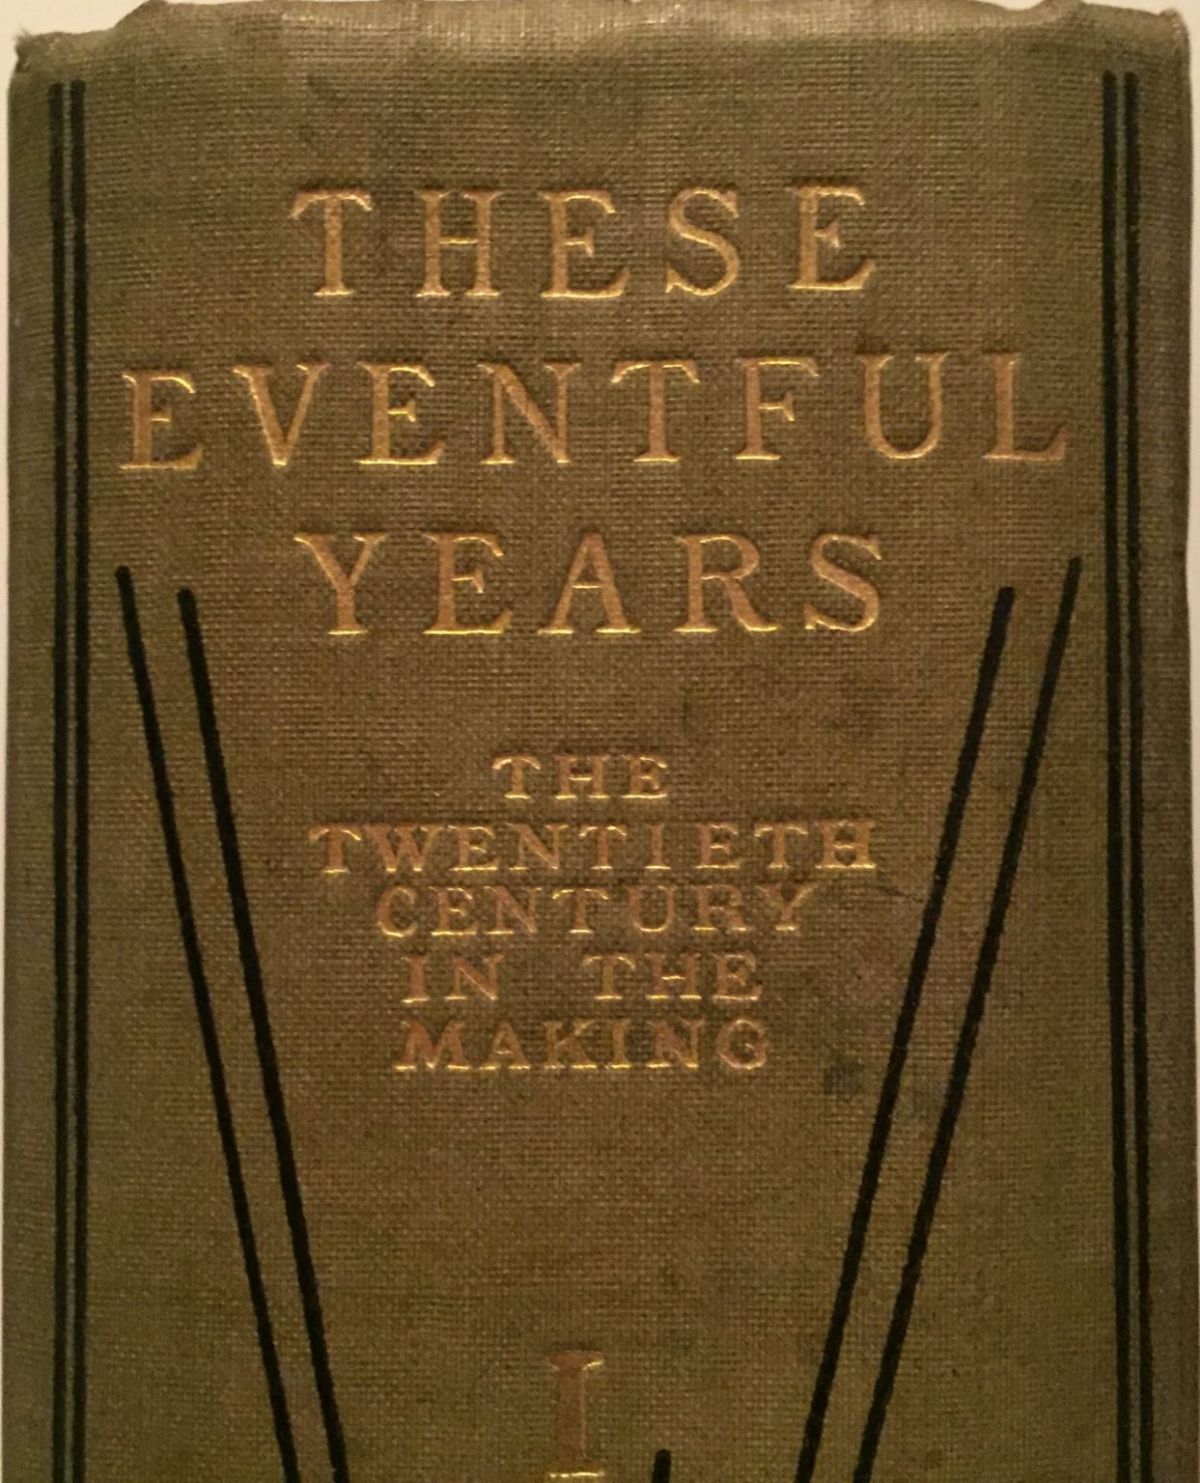 THESE EVENTFUL YEARS: The Twentieth Century In The Making, Vol 1